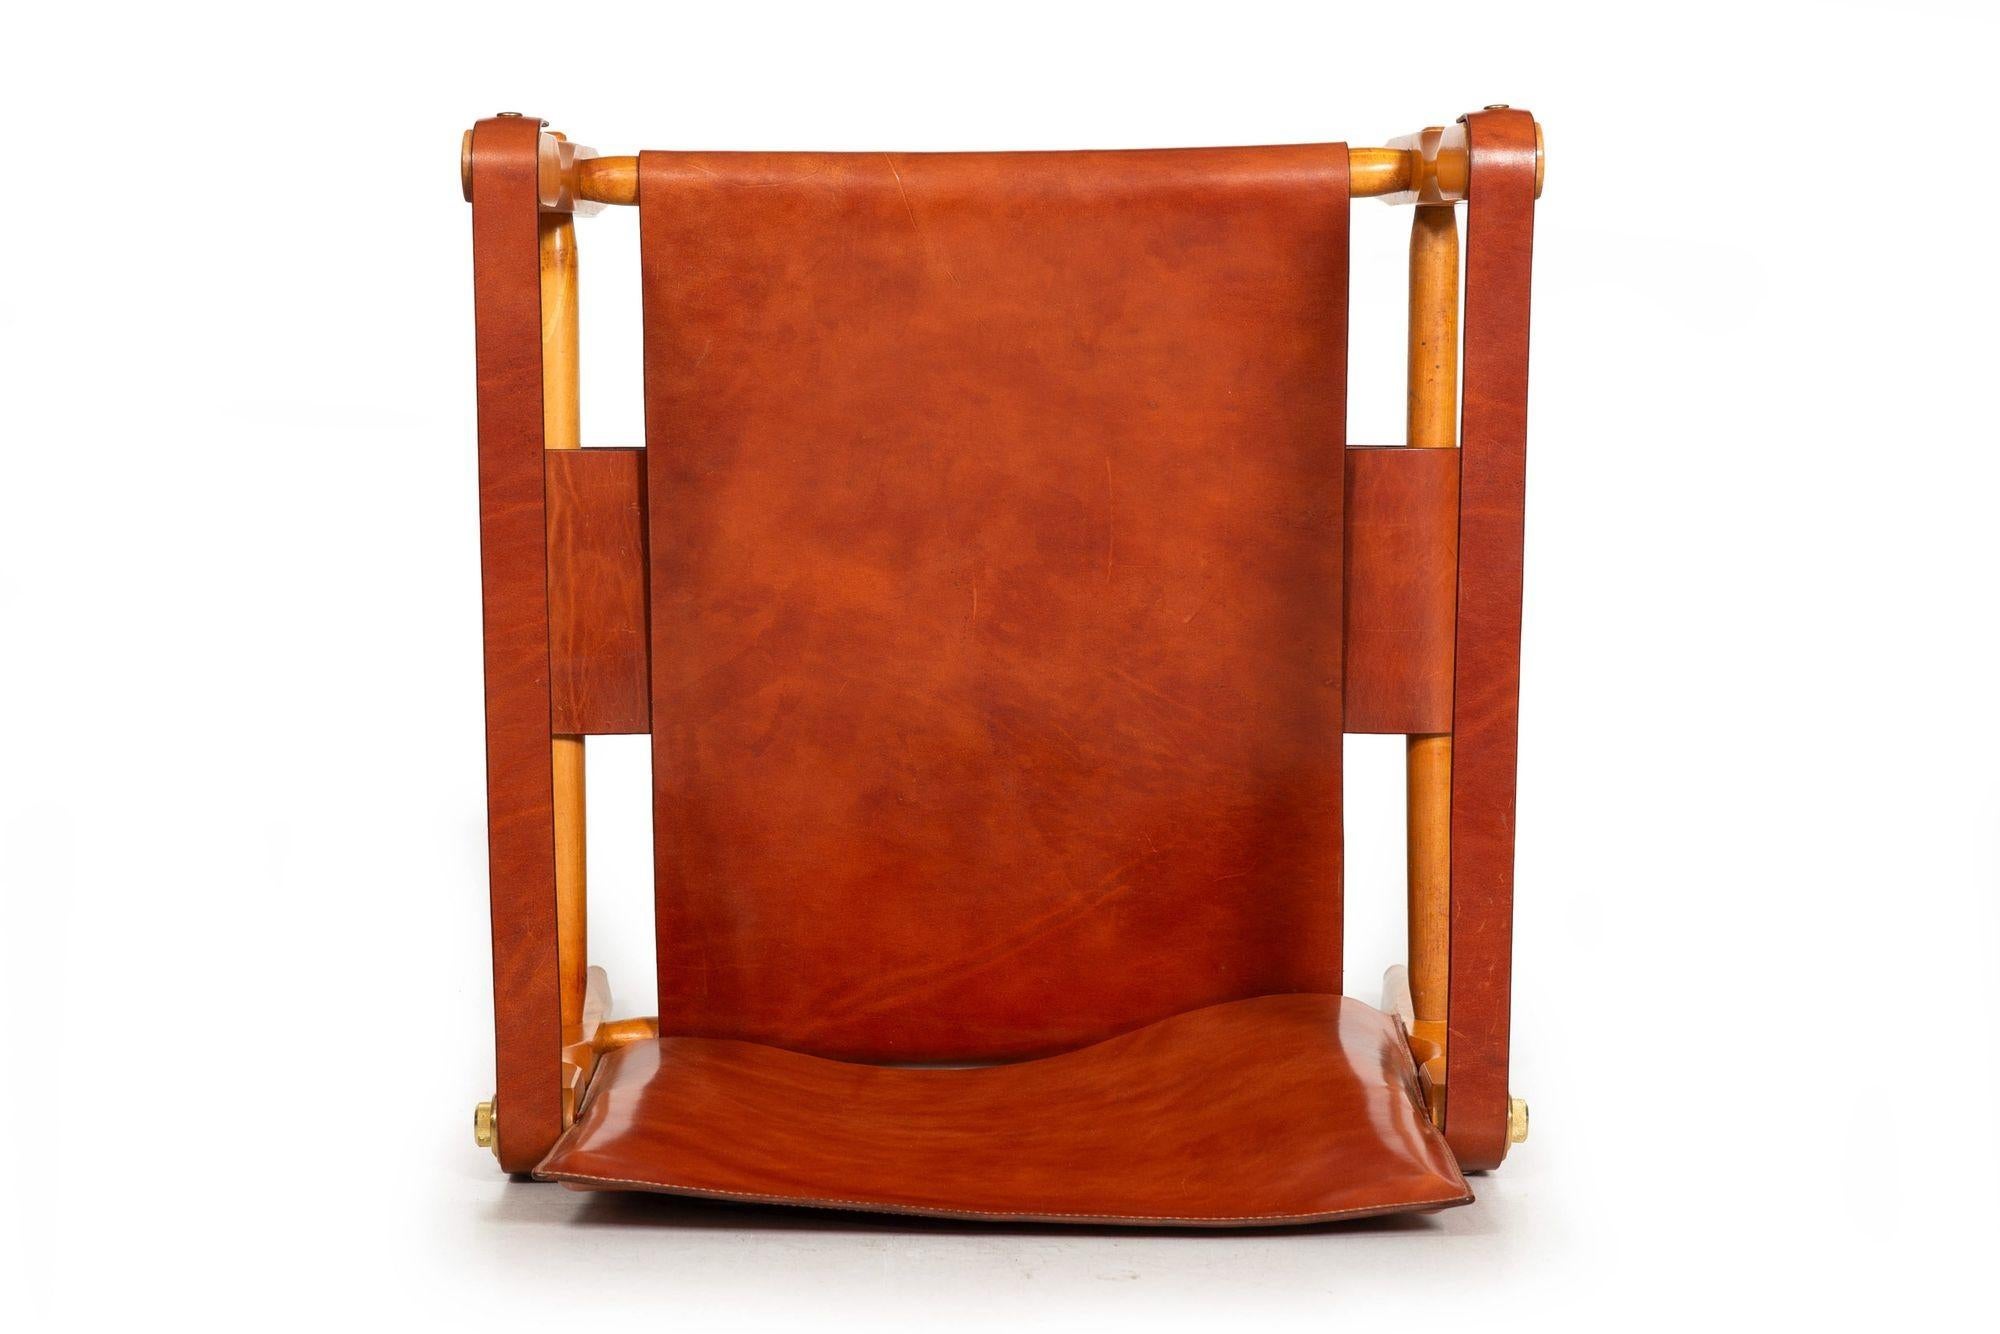 Brass Gorgeous Circa 1970s Mid-Century Modern “Safari” Chair in New Leather For Sale